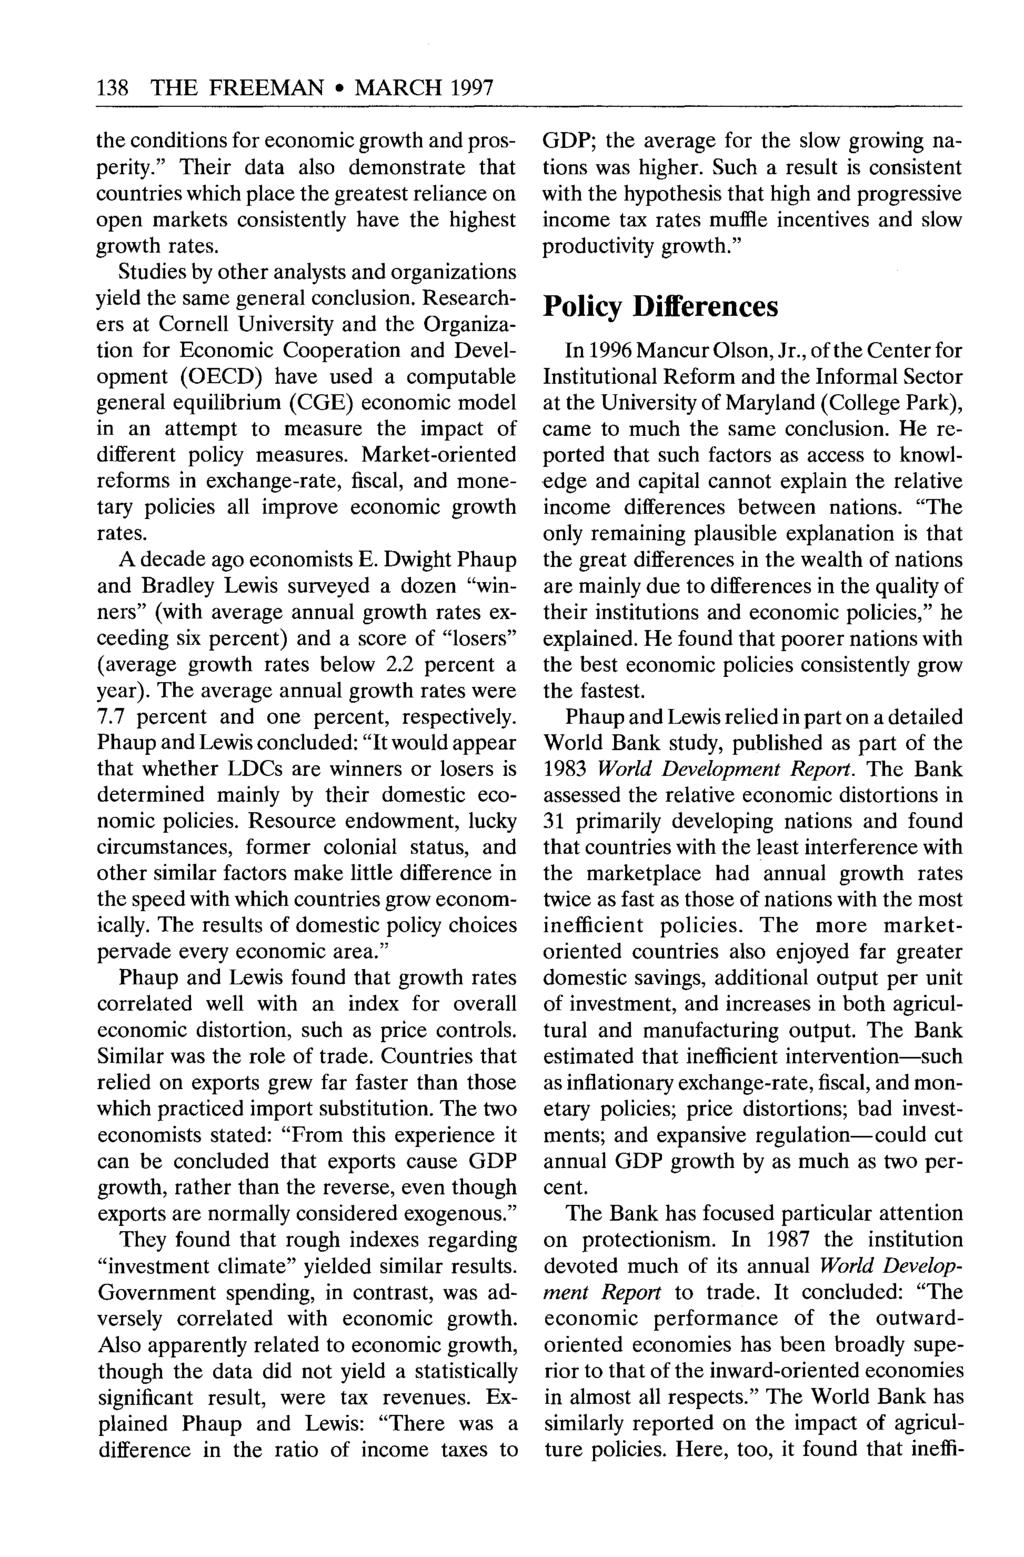 138 THE FREEMAN MARCH 1997 the conditions for economic growth and prosperity.